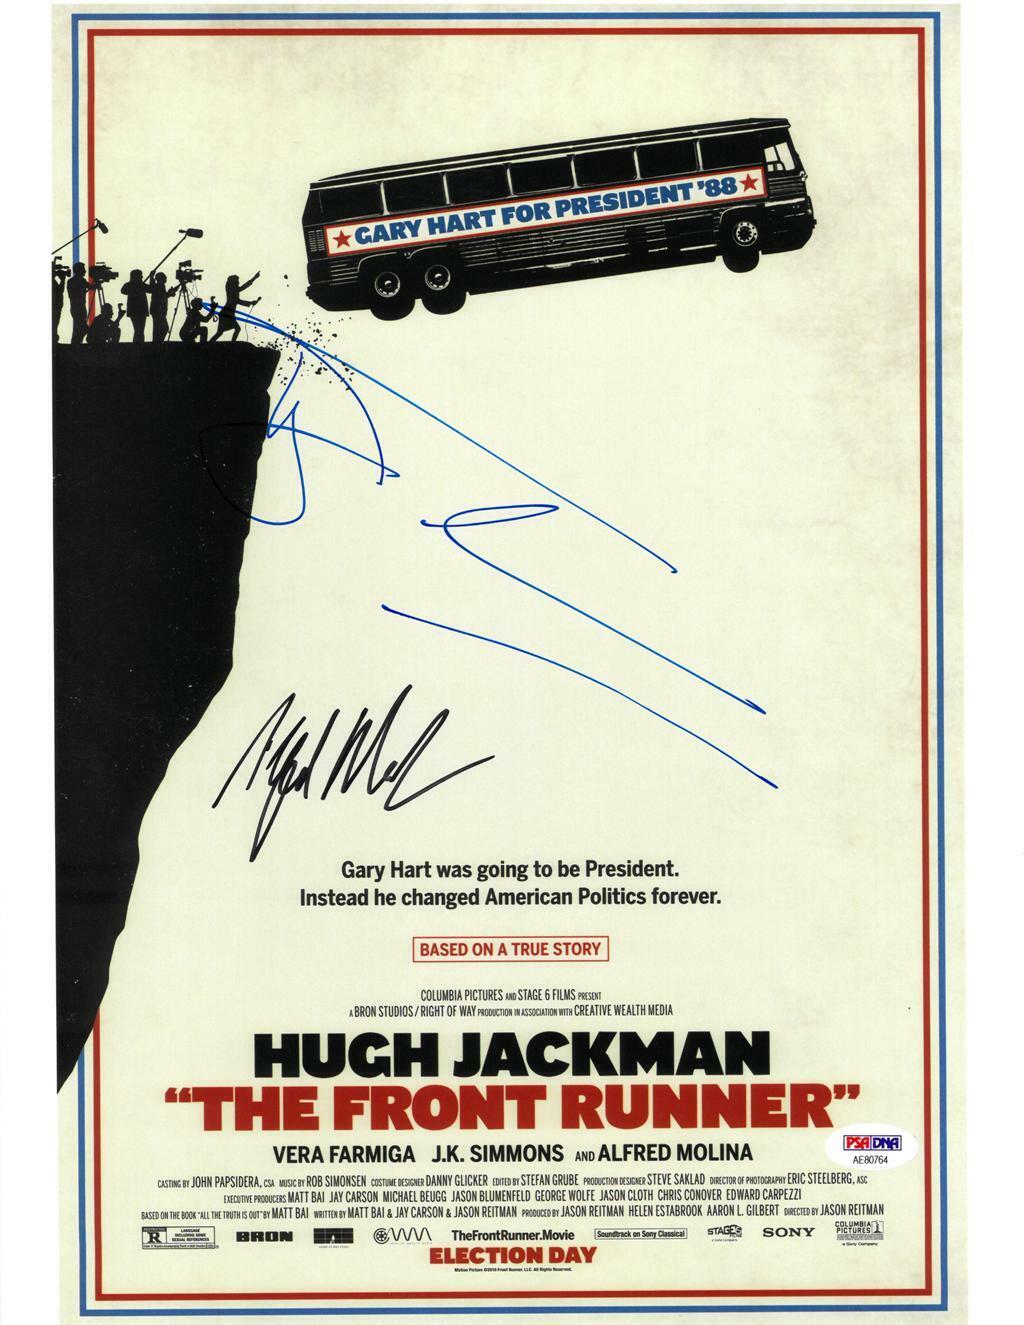 Hugh Jackman/Alfred Molina Signed The Front Runner 11x14 Photo Poster painting PSA/DNA #AE80764